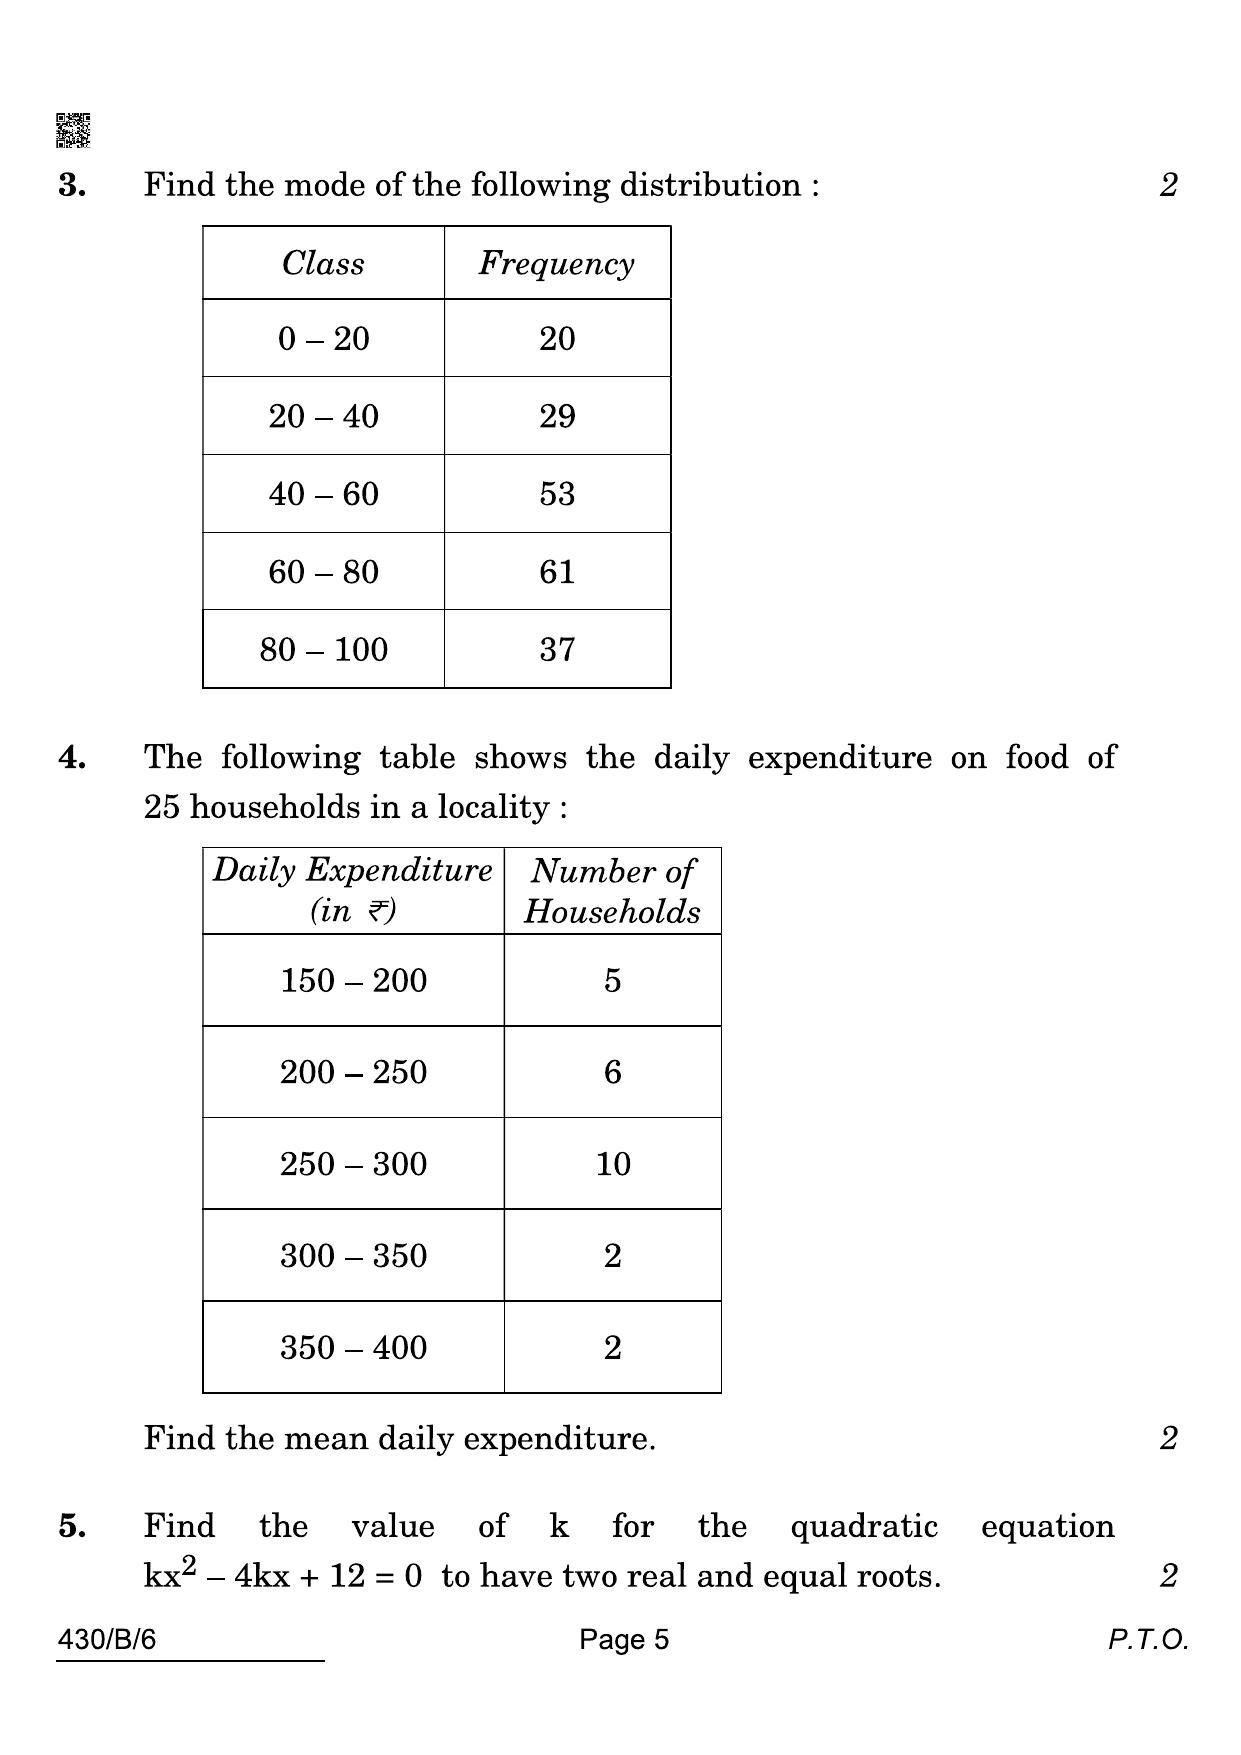 CBSE Class 10 430-B-6 Maths Basic Blind 2022 Compartment Question Paper - Page 5